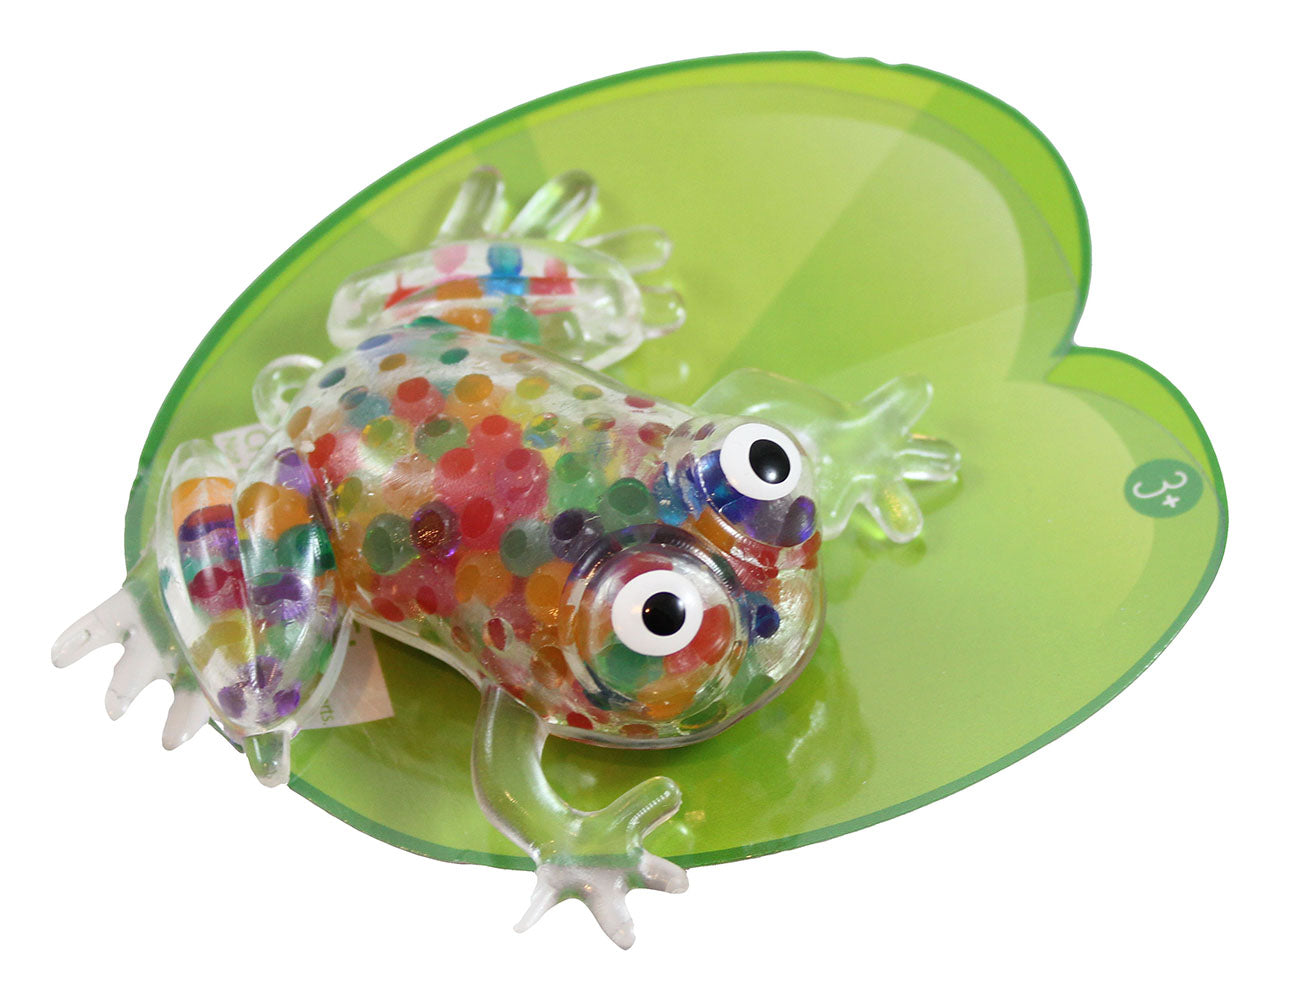 Frog Rainbow Water Bead Filled Squeeze Stress Ball - Sensory